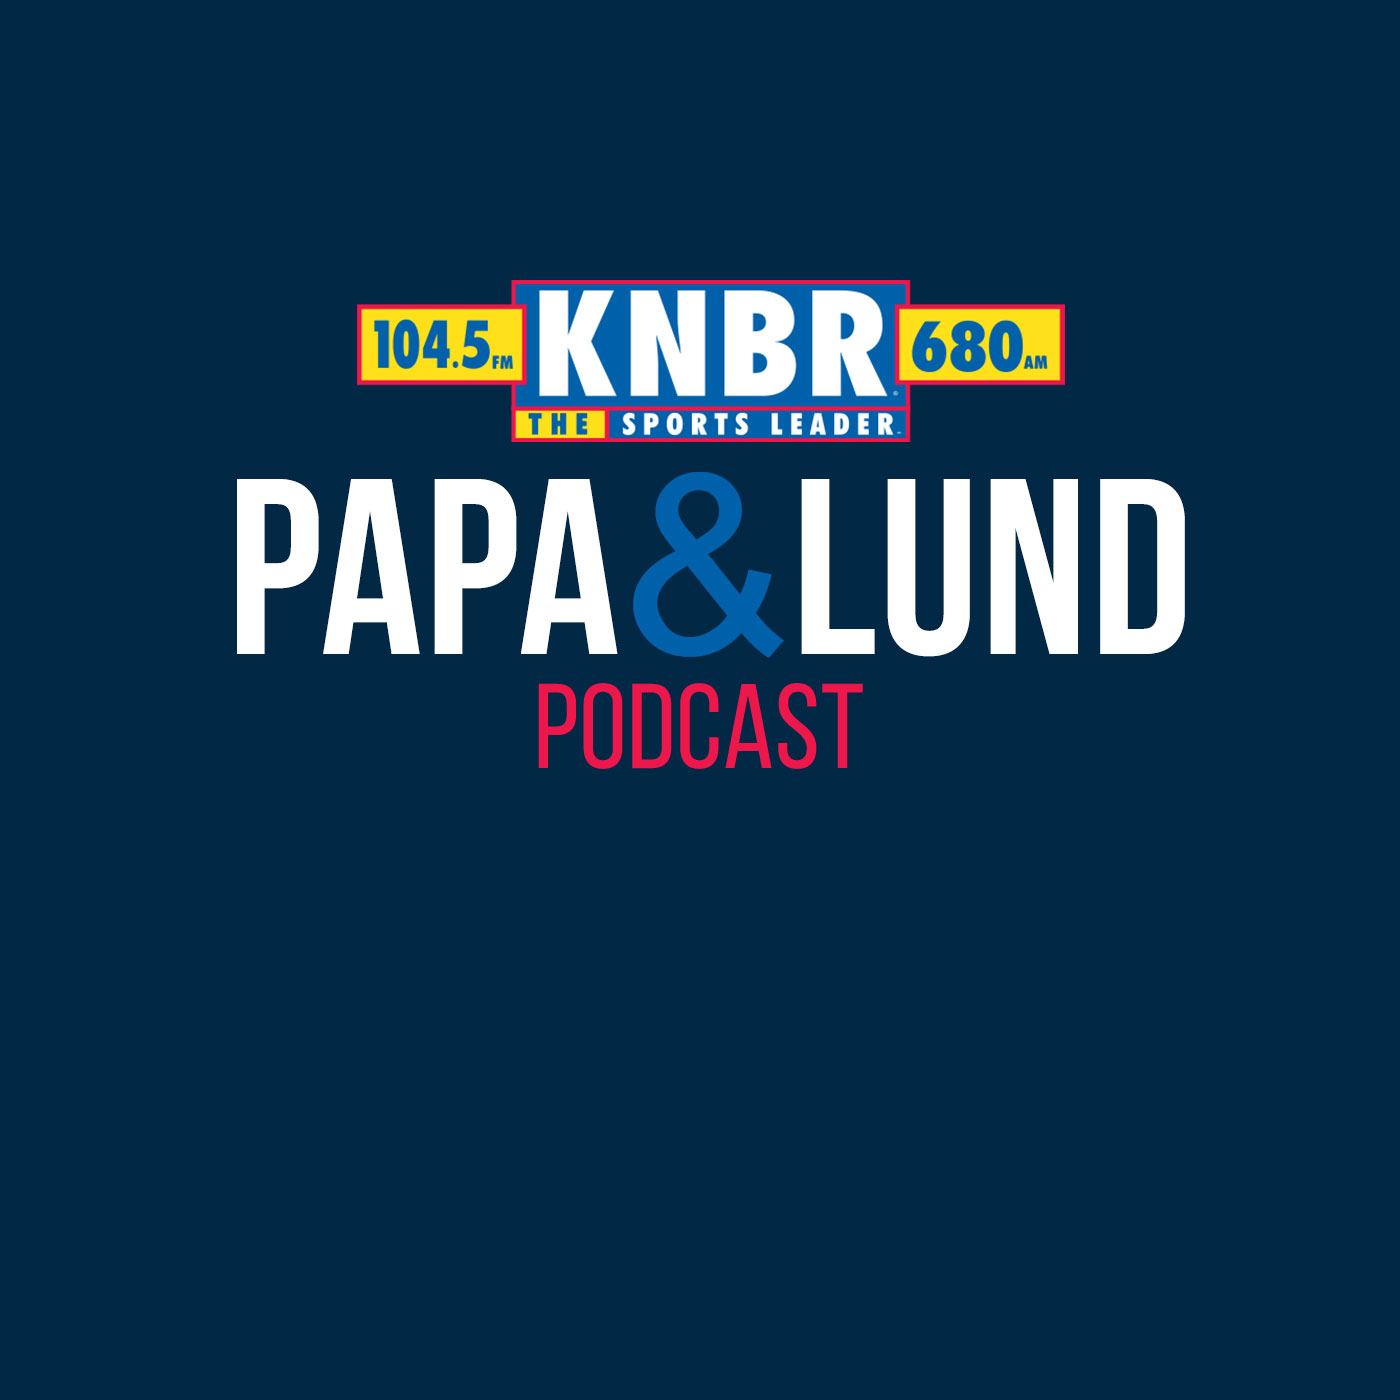 1-3 Jeff Garcia joins Papa & Lund and gives Brock Purdy his flowers after Brock Purdy broke his franchise record for passing yards in a single season and why its so exciting to watch this 49ers offense operate